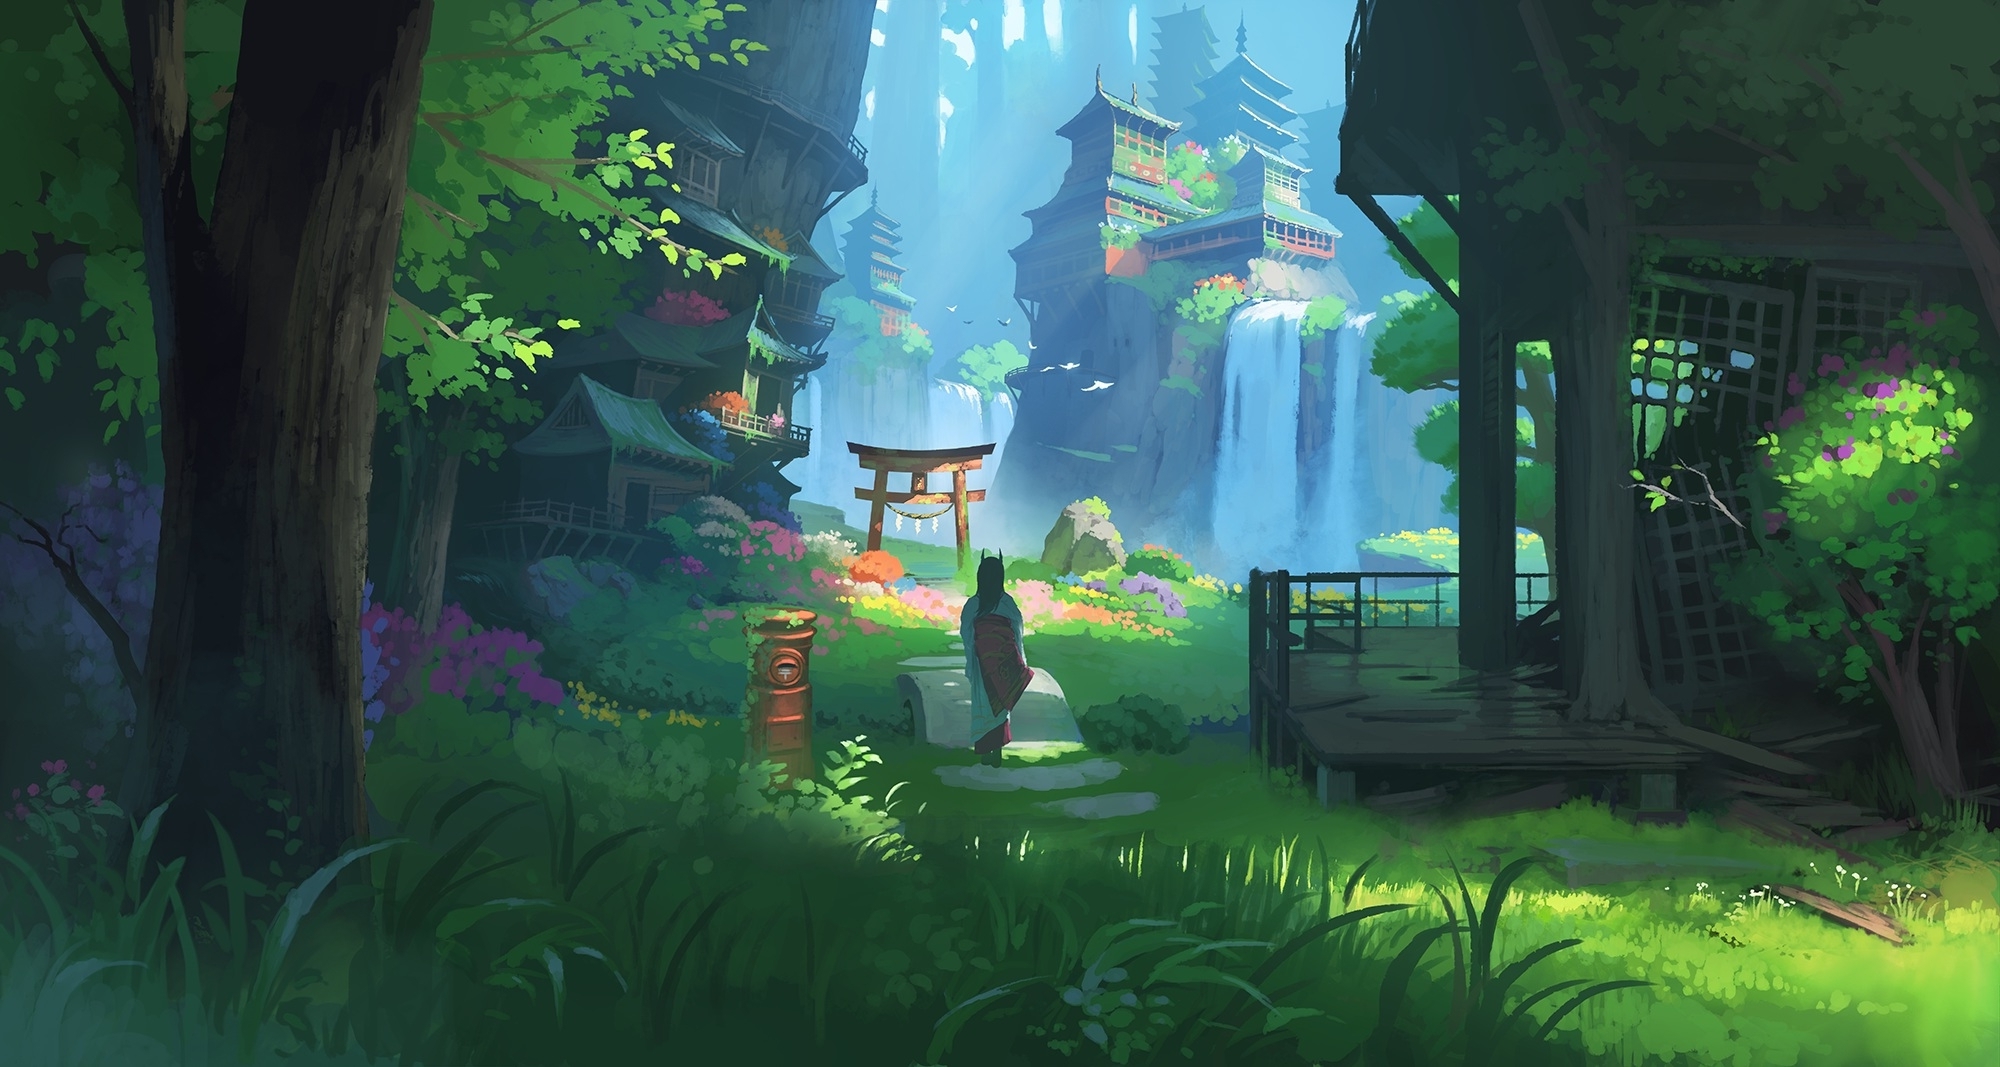 Wallpaper Horns, Anime Landscape, Fantasy, Asian Buildings, Japanese Clothes, Waterfall:2000x1067